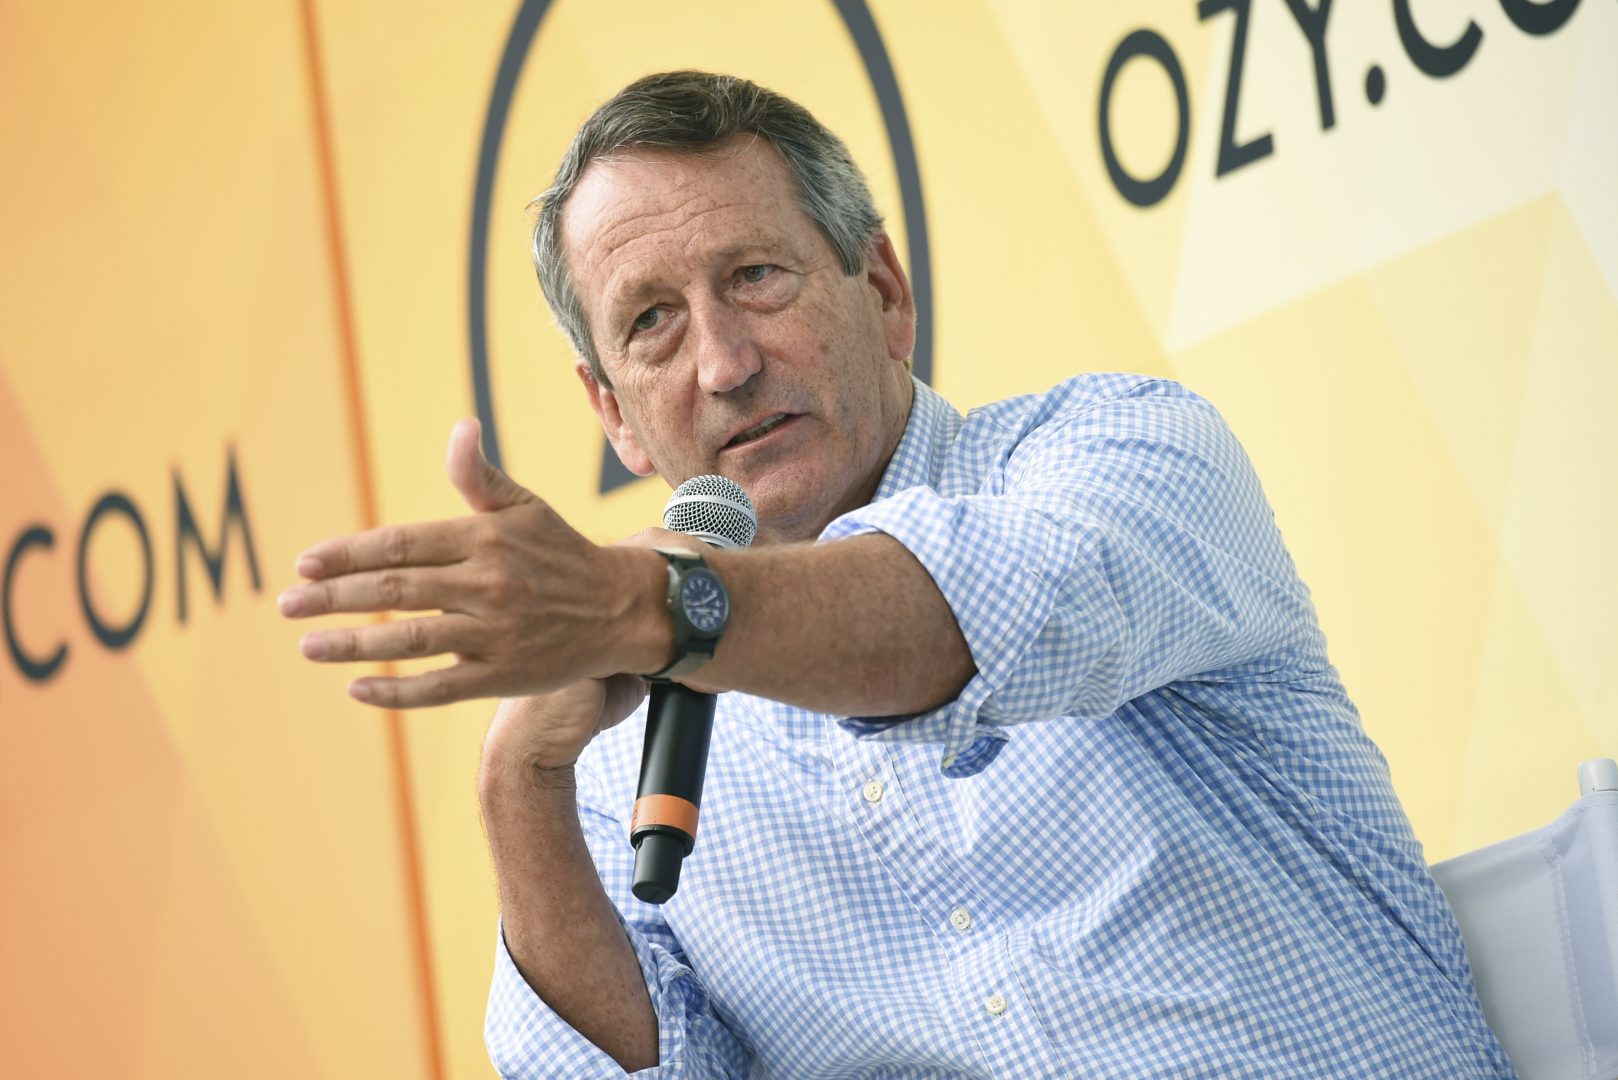 FILE PHOTO: In this July 21, 2018, file photo, Republican politician Mark Sanford speaks at OZY Fest in Central Park in New York. 